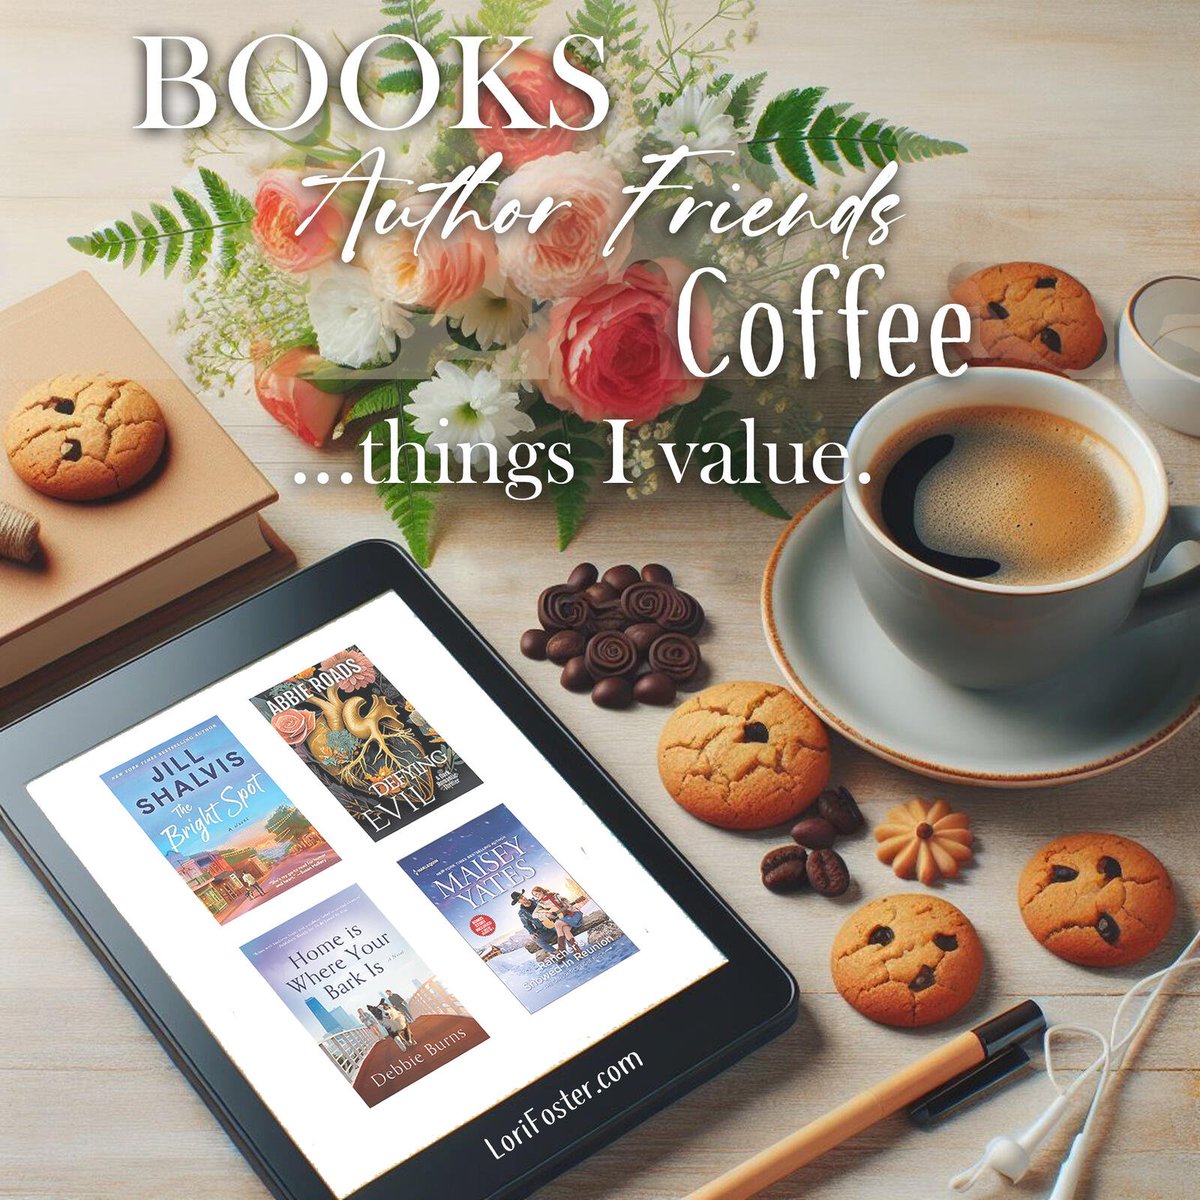 Books and author friends go well with #coffee. Here's hoping everyone enjoys their weekend!